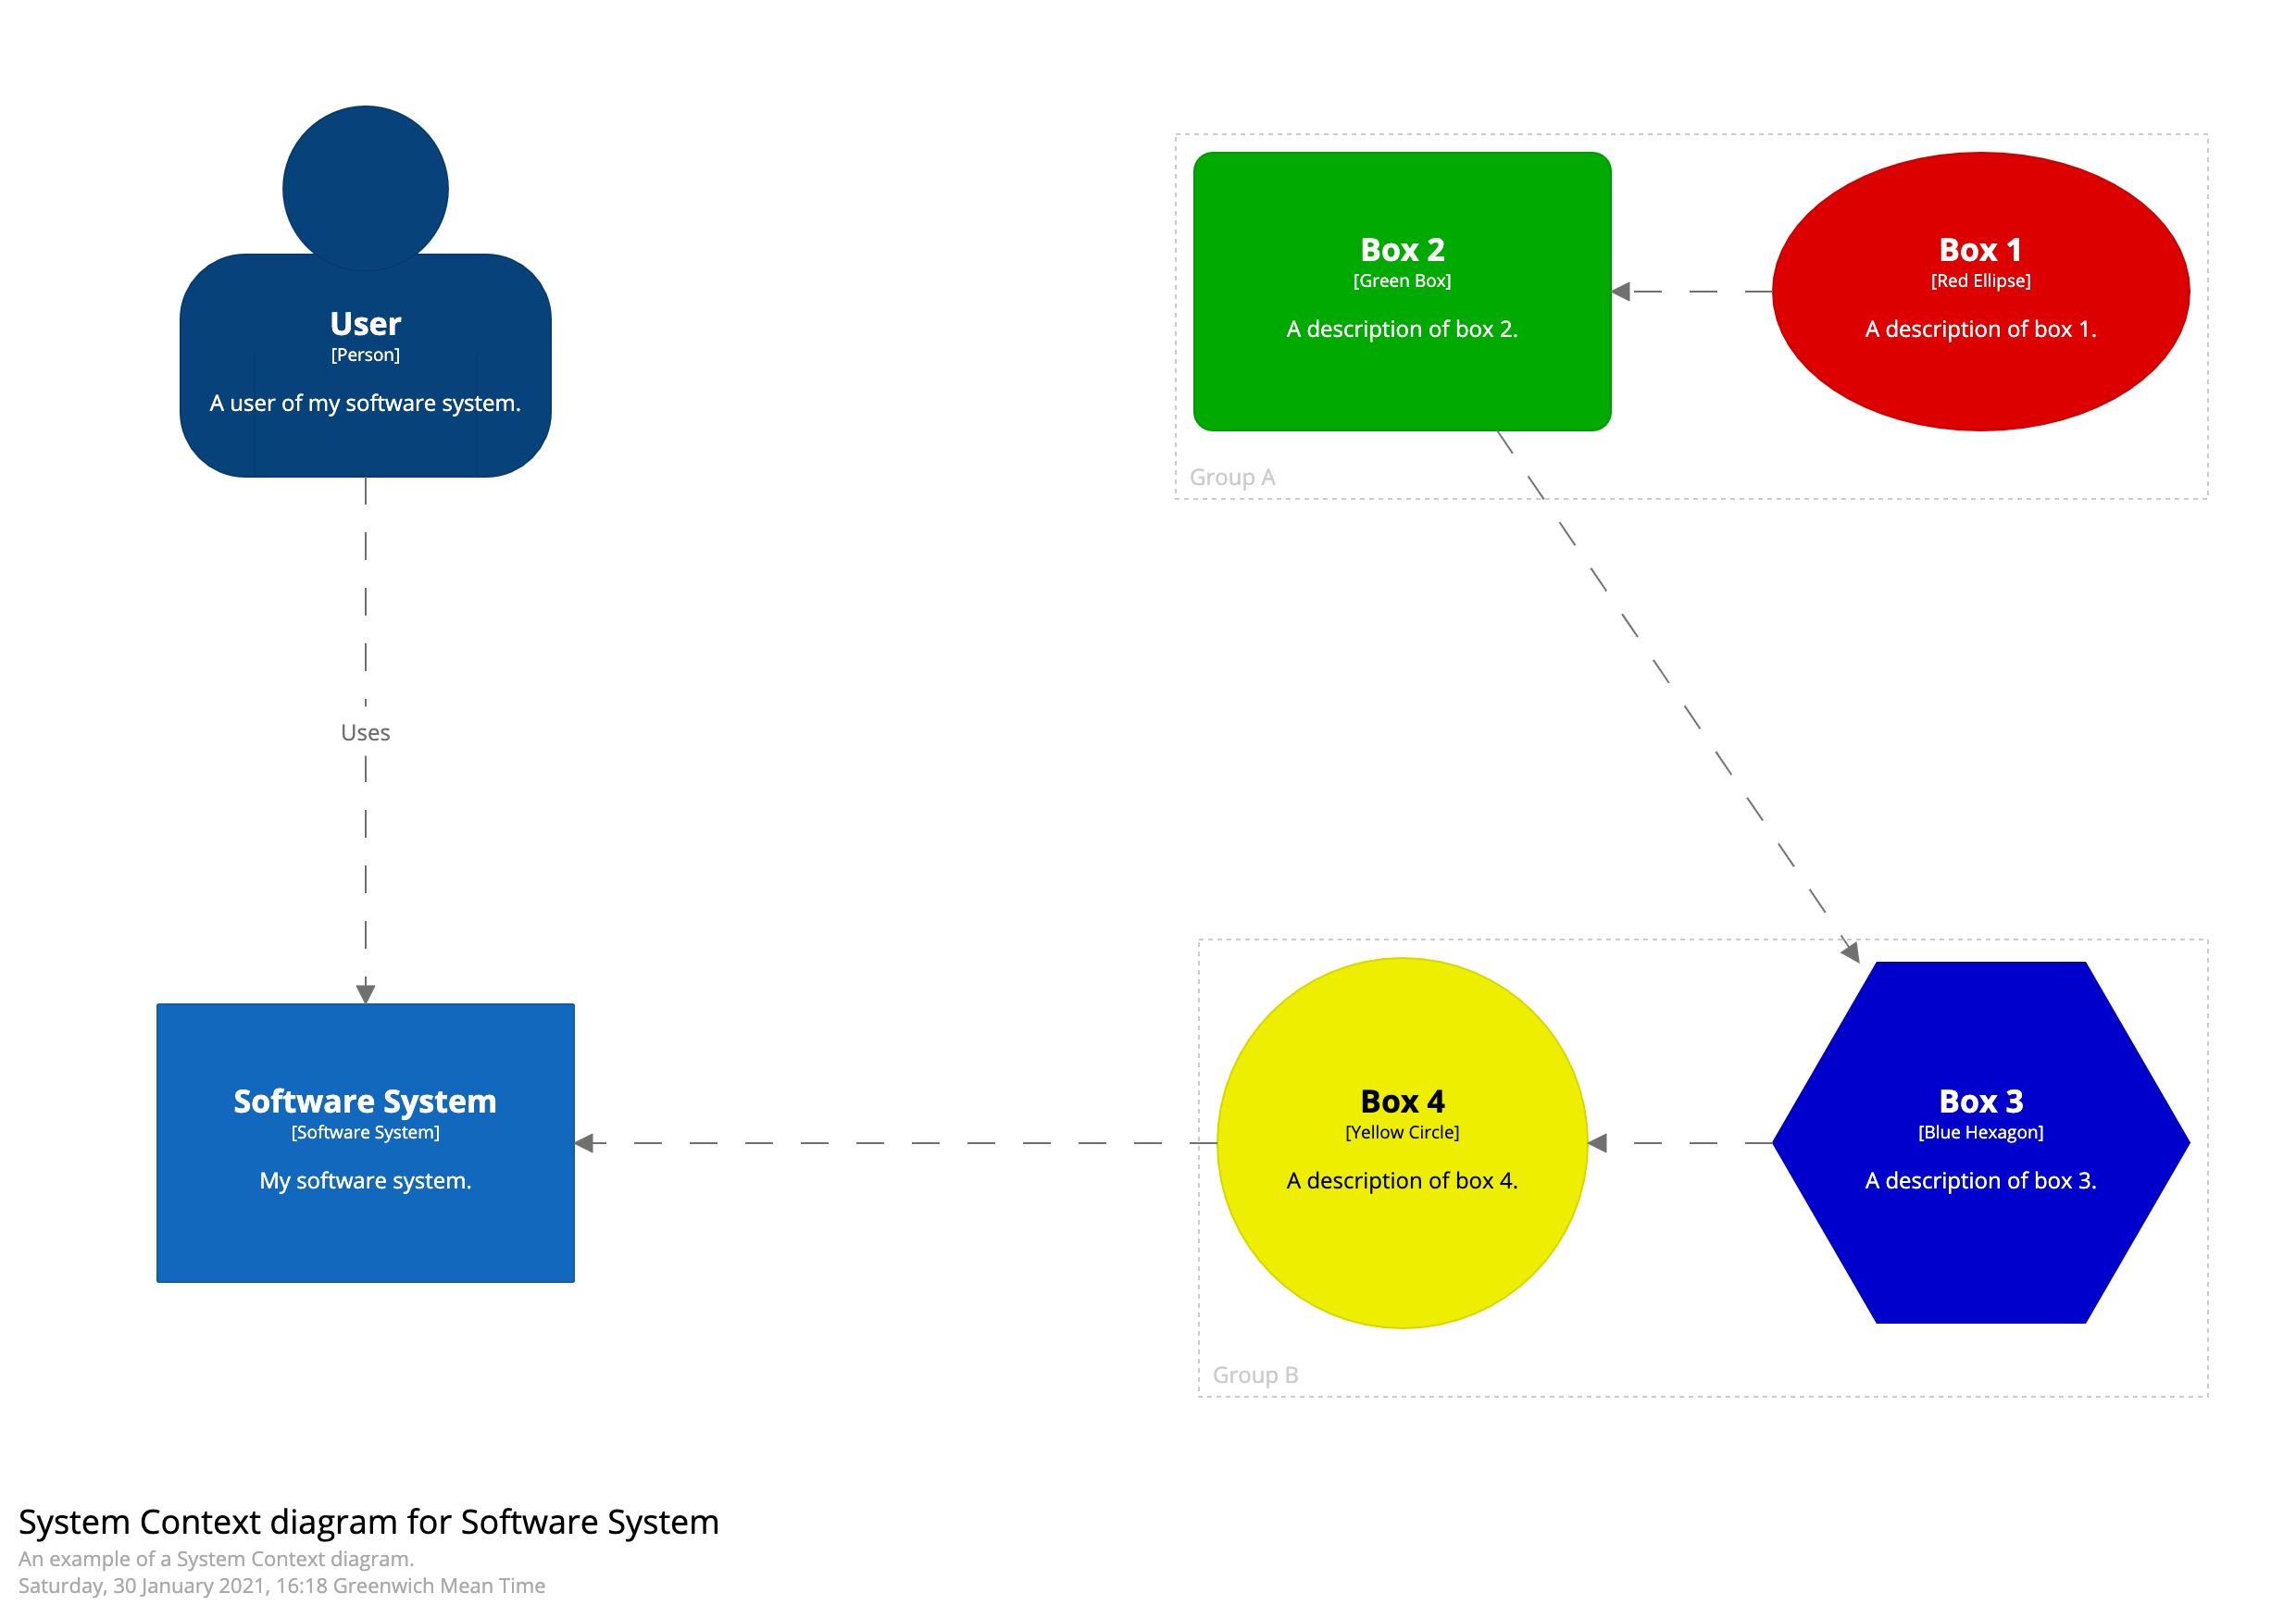 System context diagram with additional custom elements